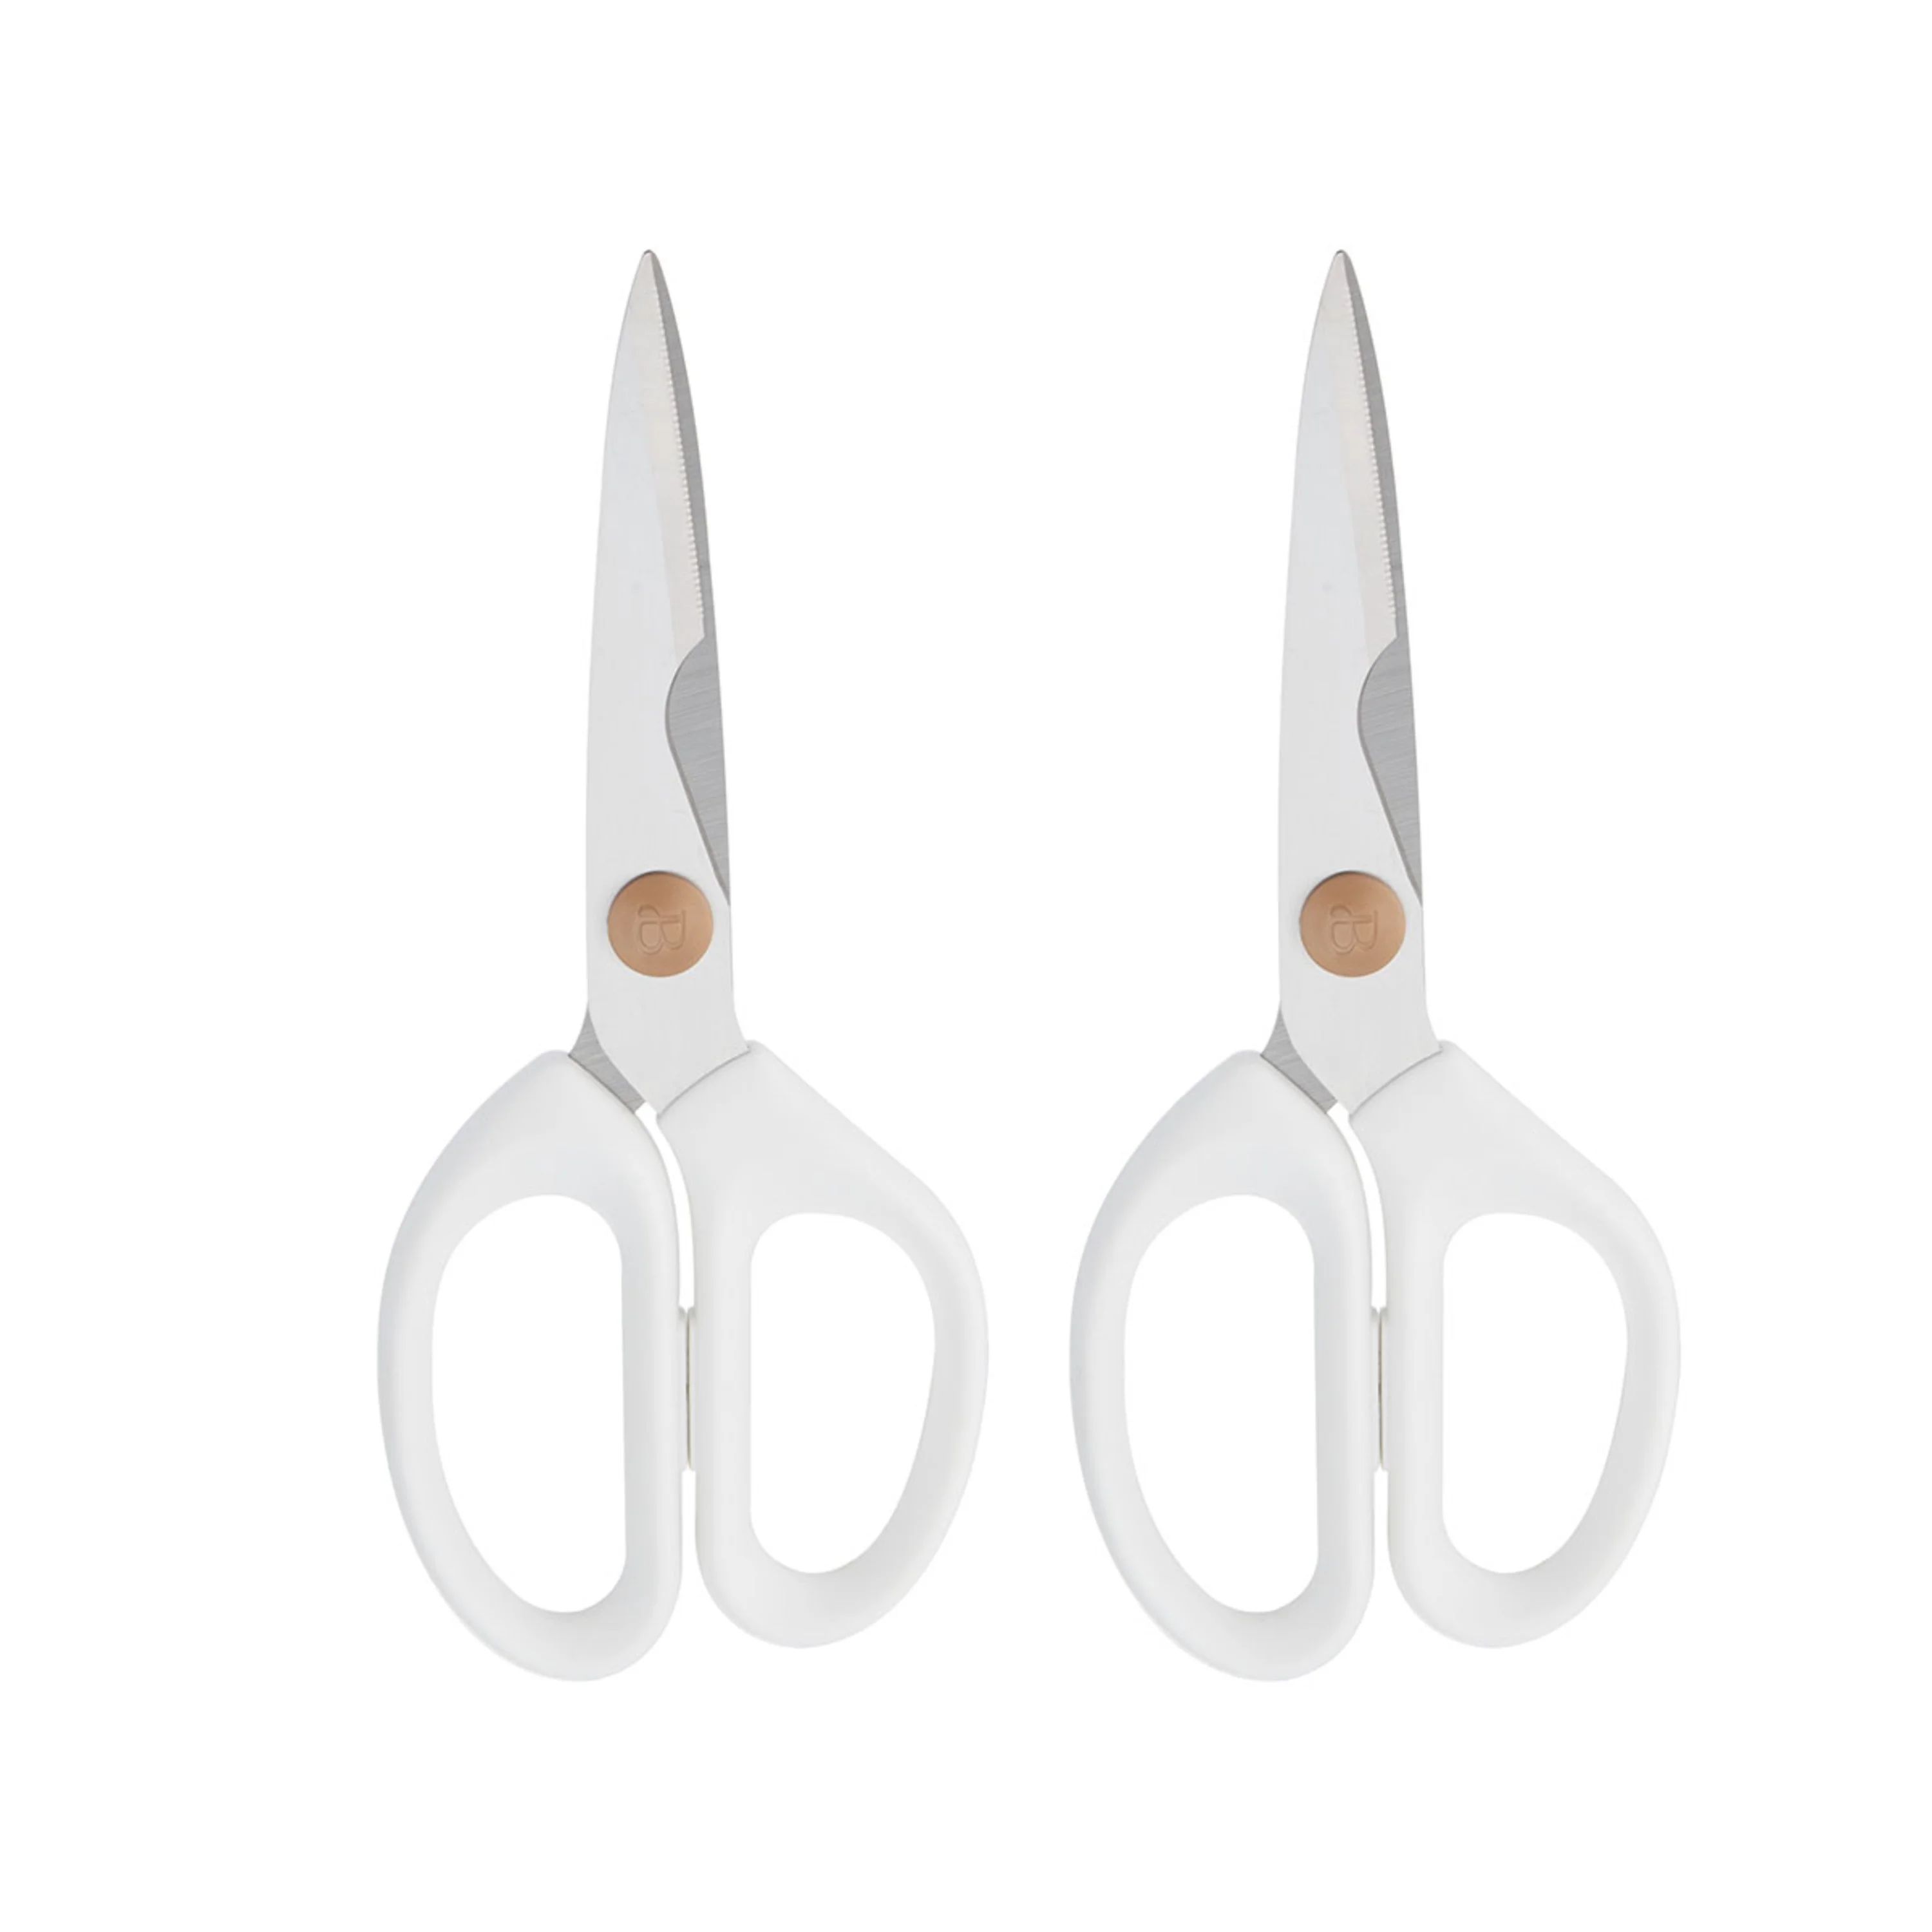 Beautiful 2-piece Take Apart All-Purpose Stainless Steel Shears in White | Walmart (US)